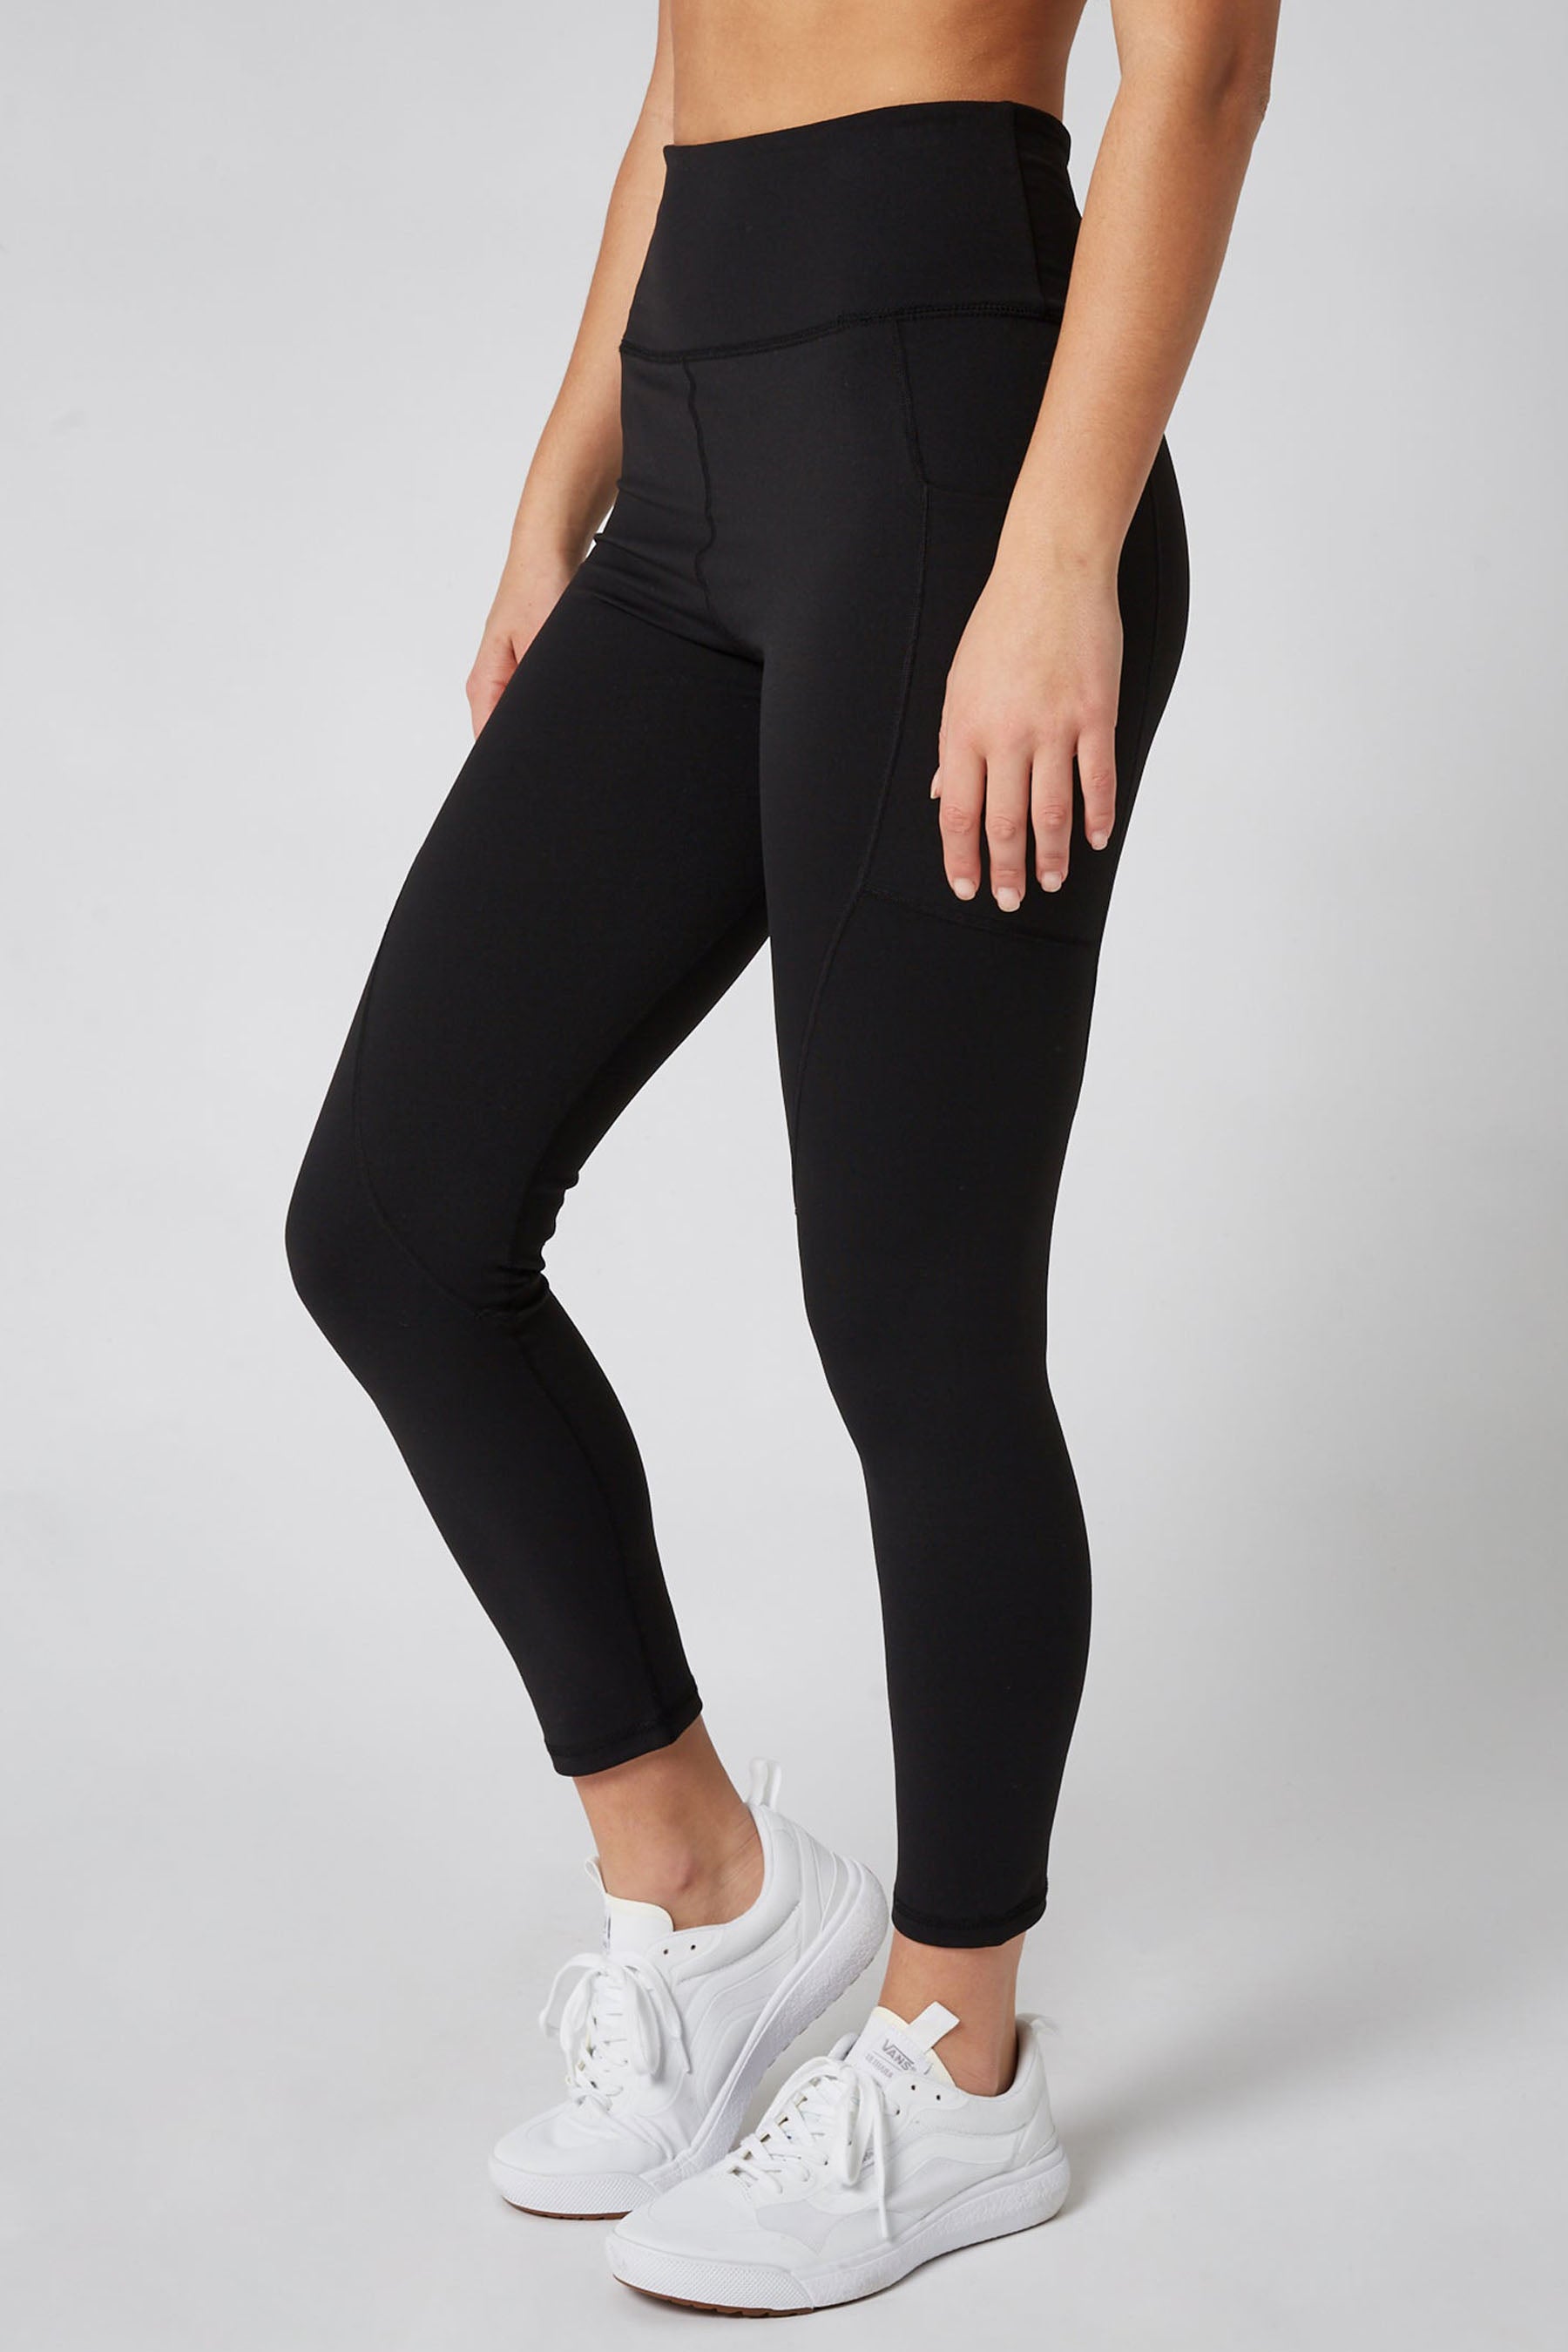 Active 7/8 Legging Black | Buy Online | All About Eve Clothing